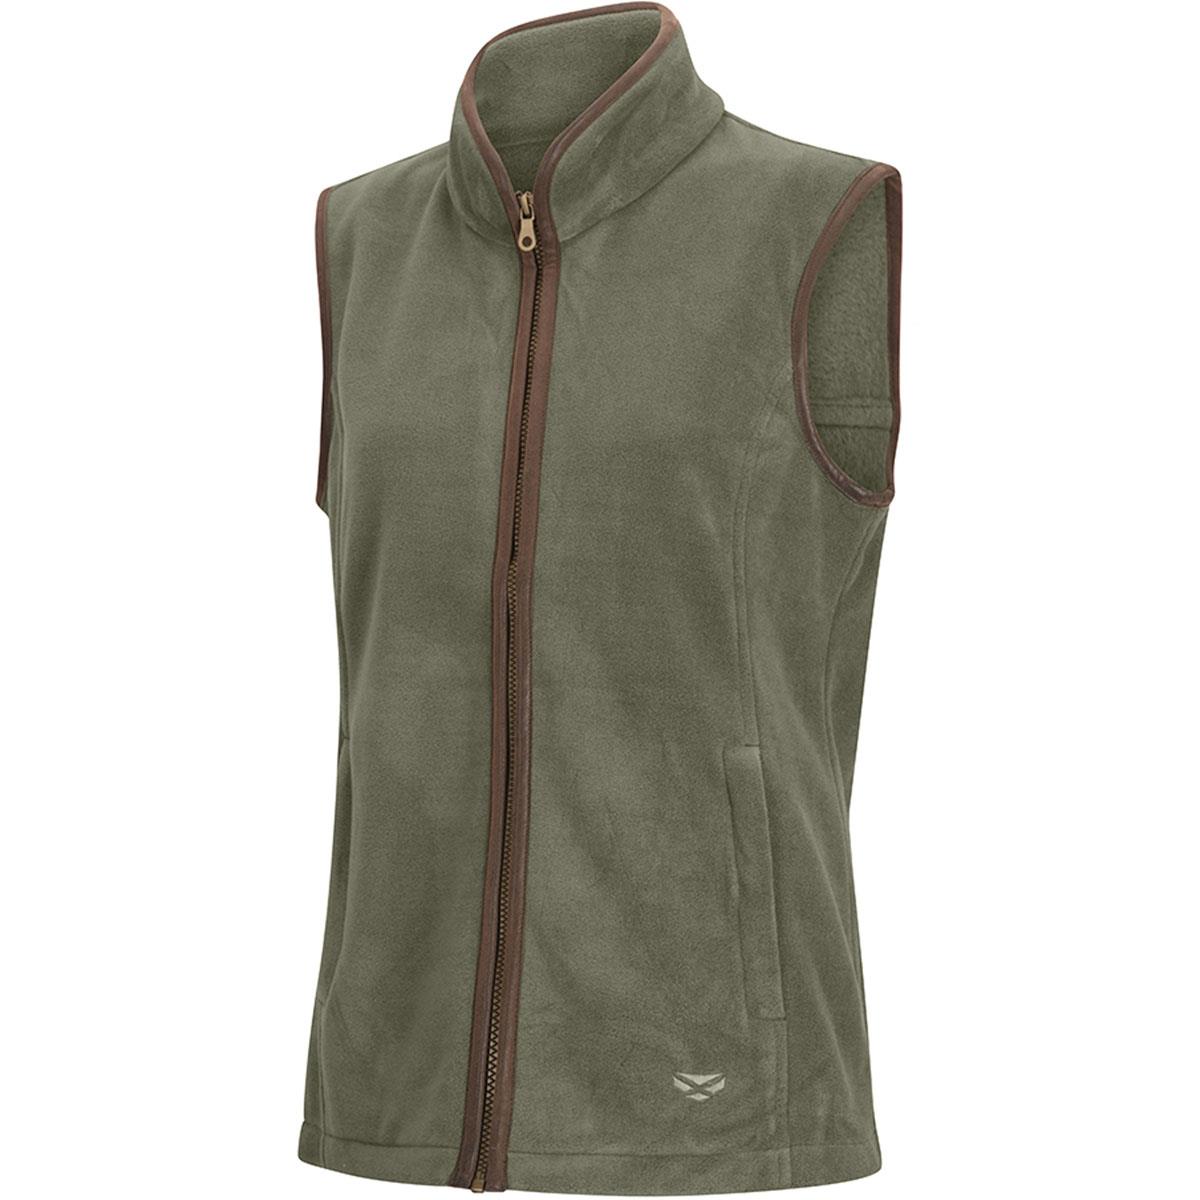 What length is the Hoggs Of Fife womens Stenton fleece gilet?